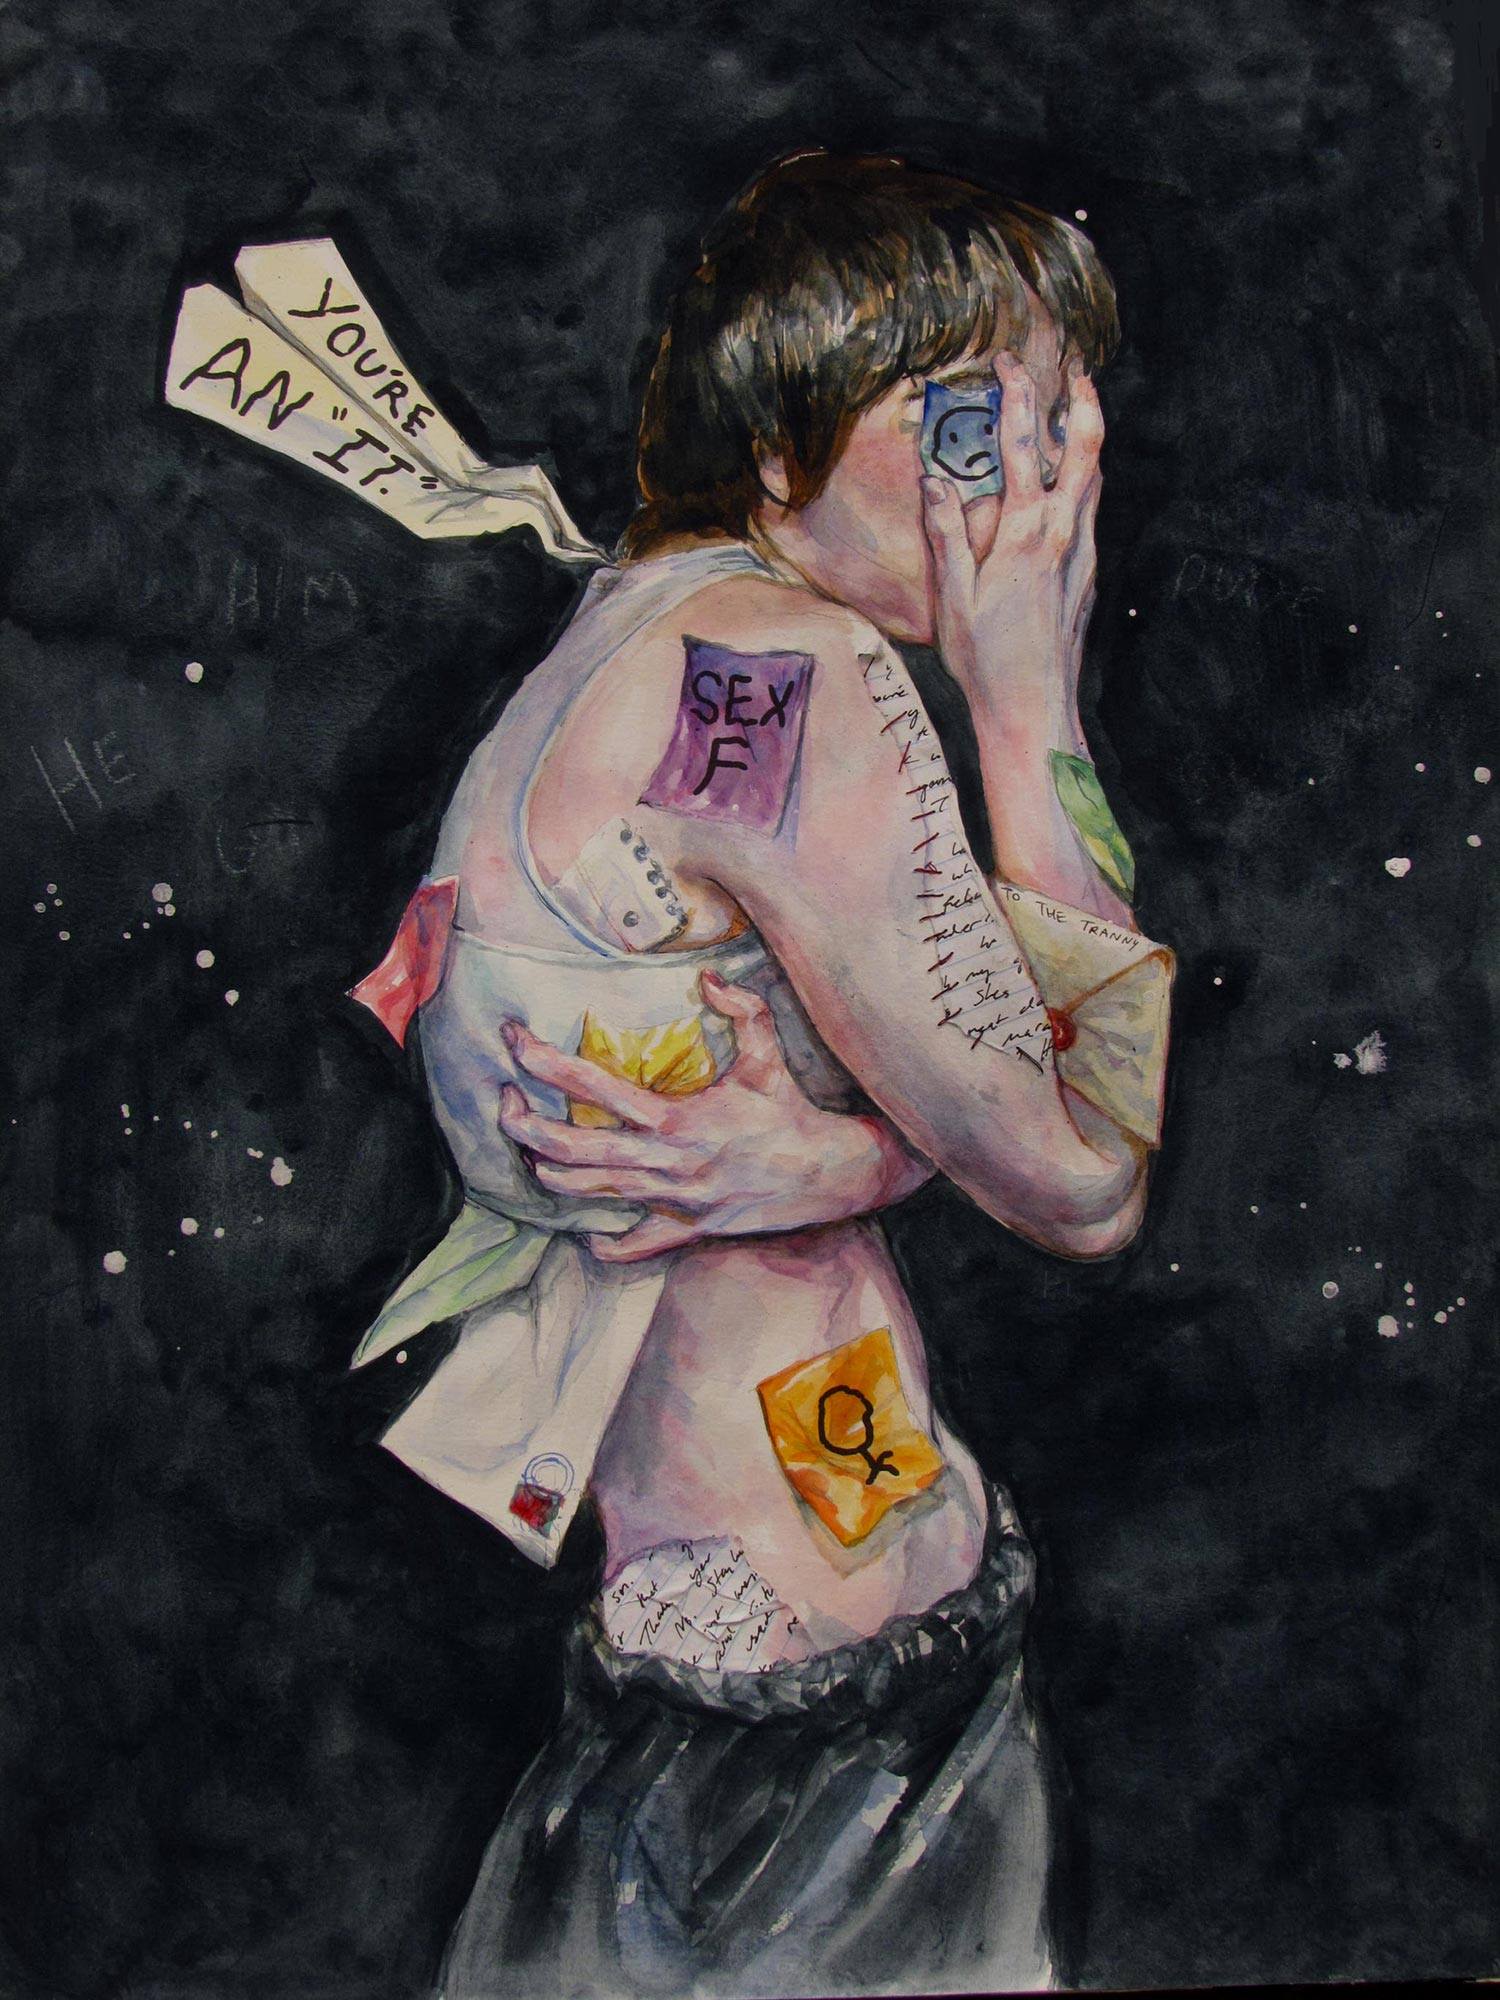 A painting of a young person with post it notes and messages attached to their body